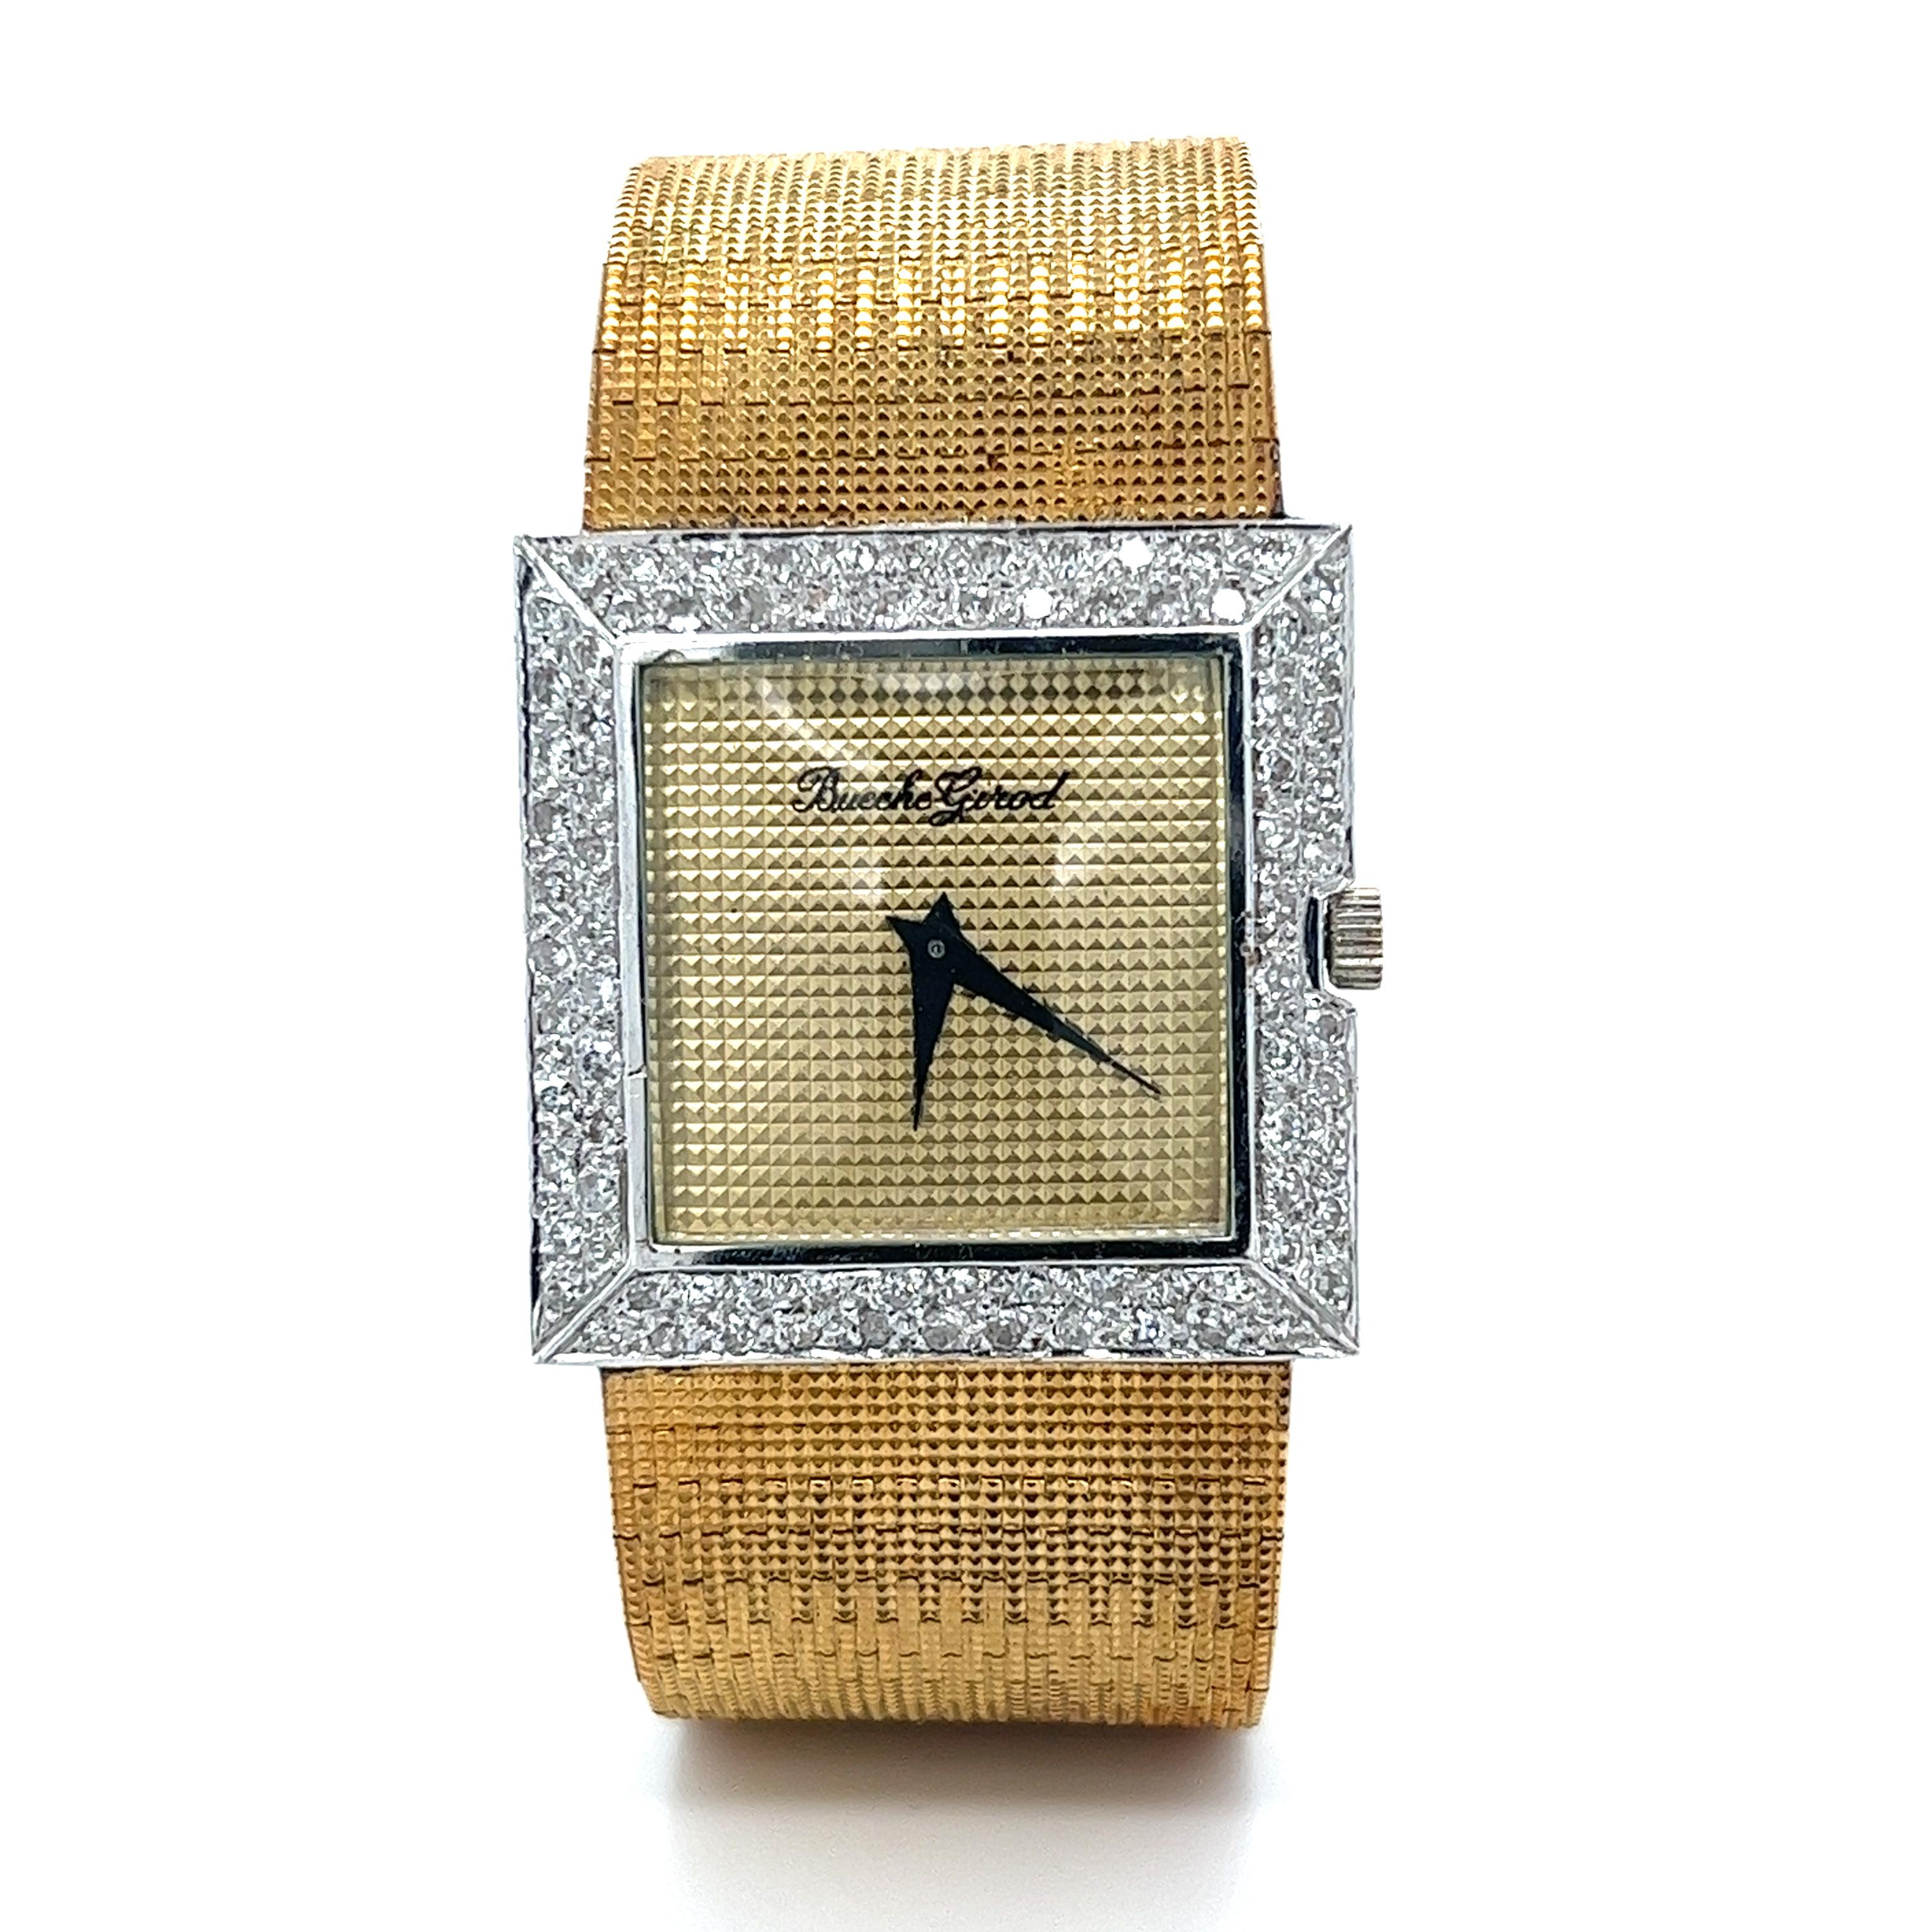 Authentic, Swiss made watch by Bueche Girod. Featuring an 18k solid gold and diamond set bezel. 

Vital Bueche founded Bueche Girod brand in 1947. He combined his own last name with his wife's, Girod. The company emblem was made up from combining